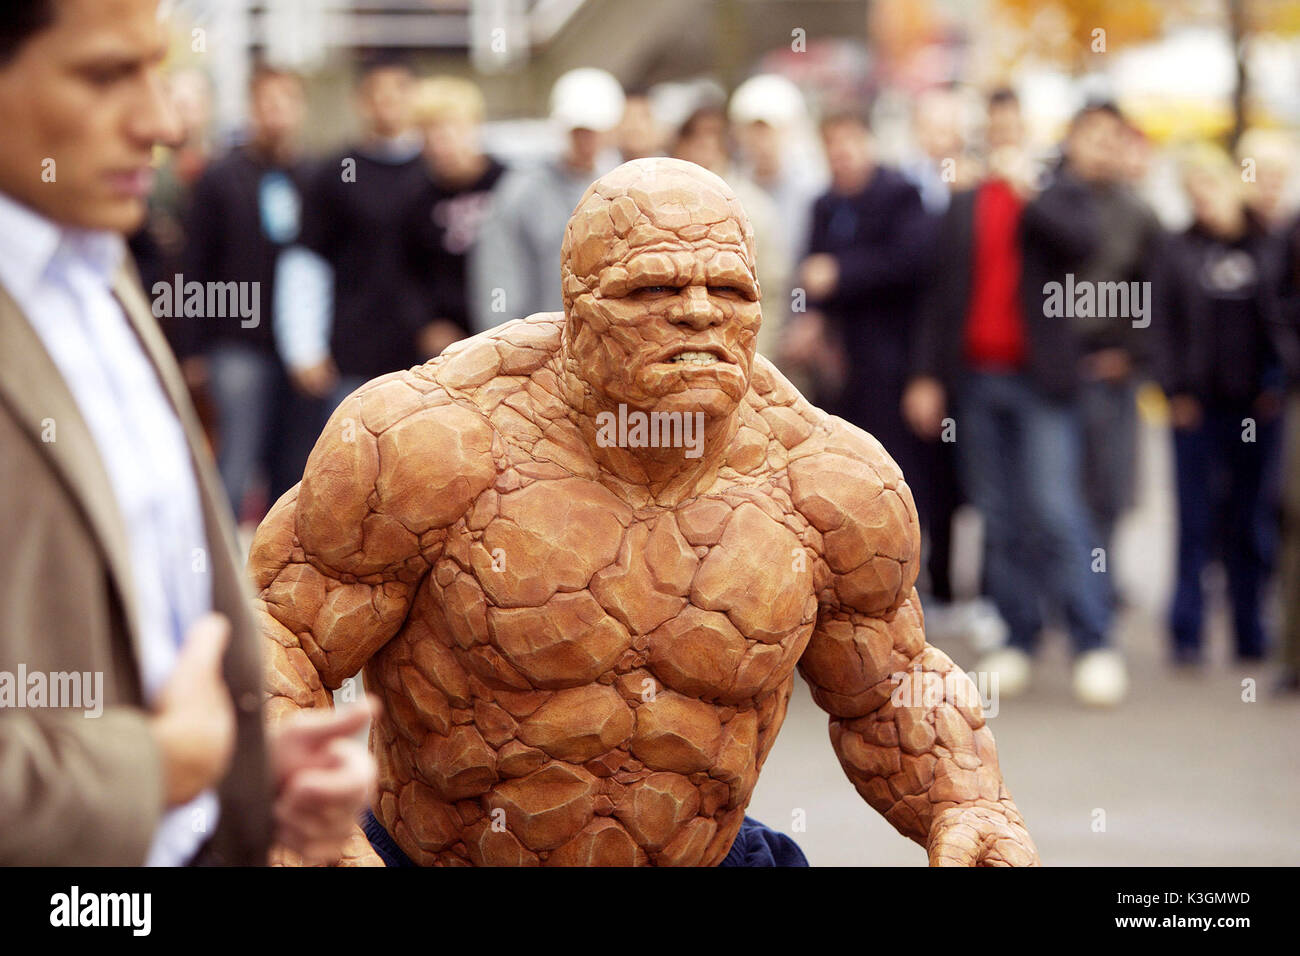 Fantastic Four Please contact the Twentieth Century Fox press office for further information. FANTASTIC FOUR IOAN GRUFFUDD, MICHAEL CHIKLIS as The Thing     Date: 2005 Stock Photo